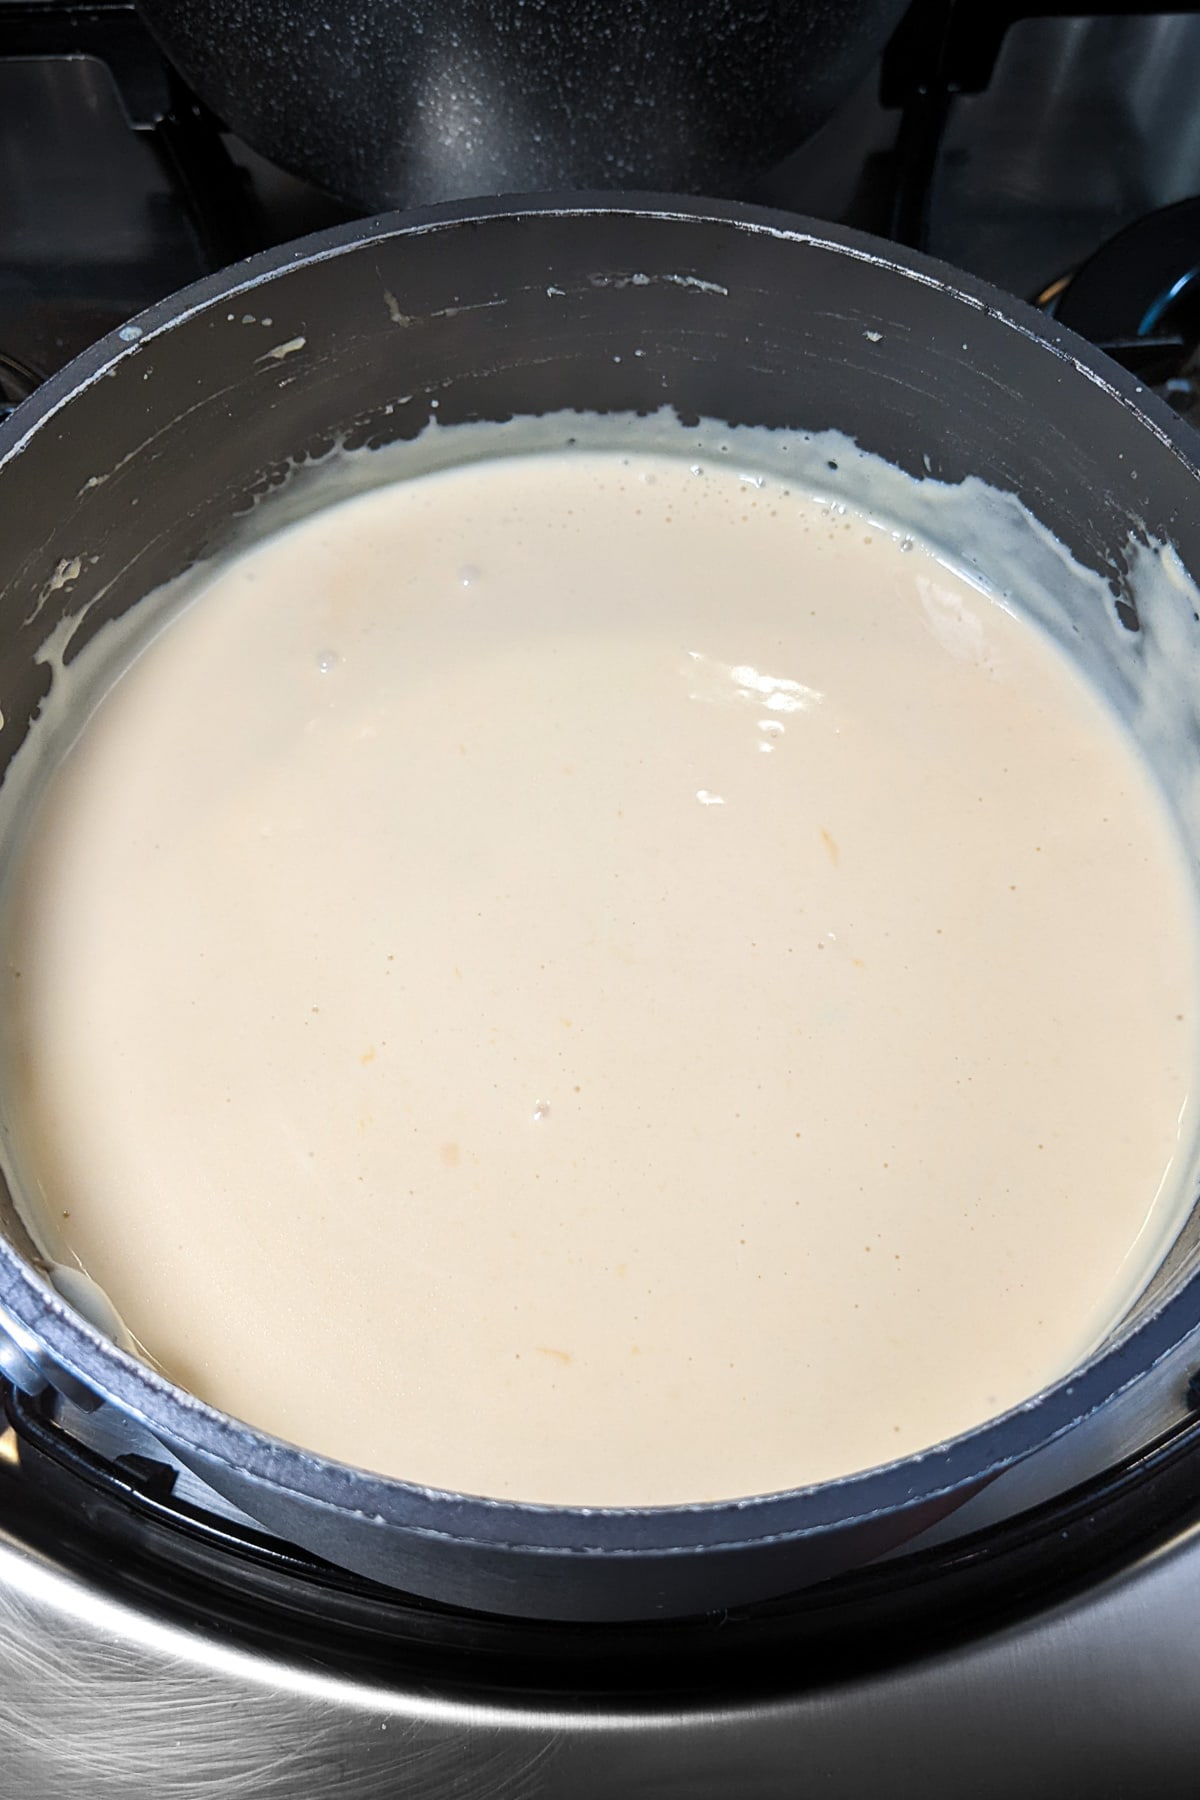 Boiled cream for mac and cheese on the stove.